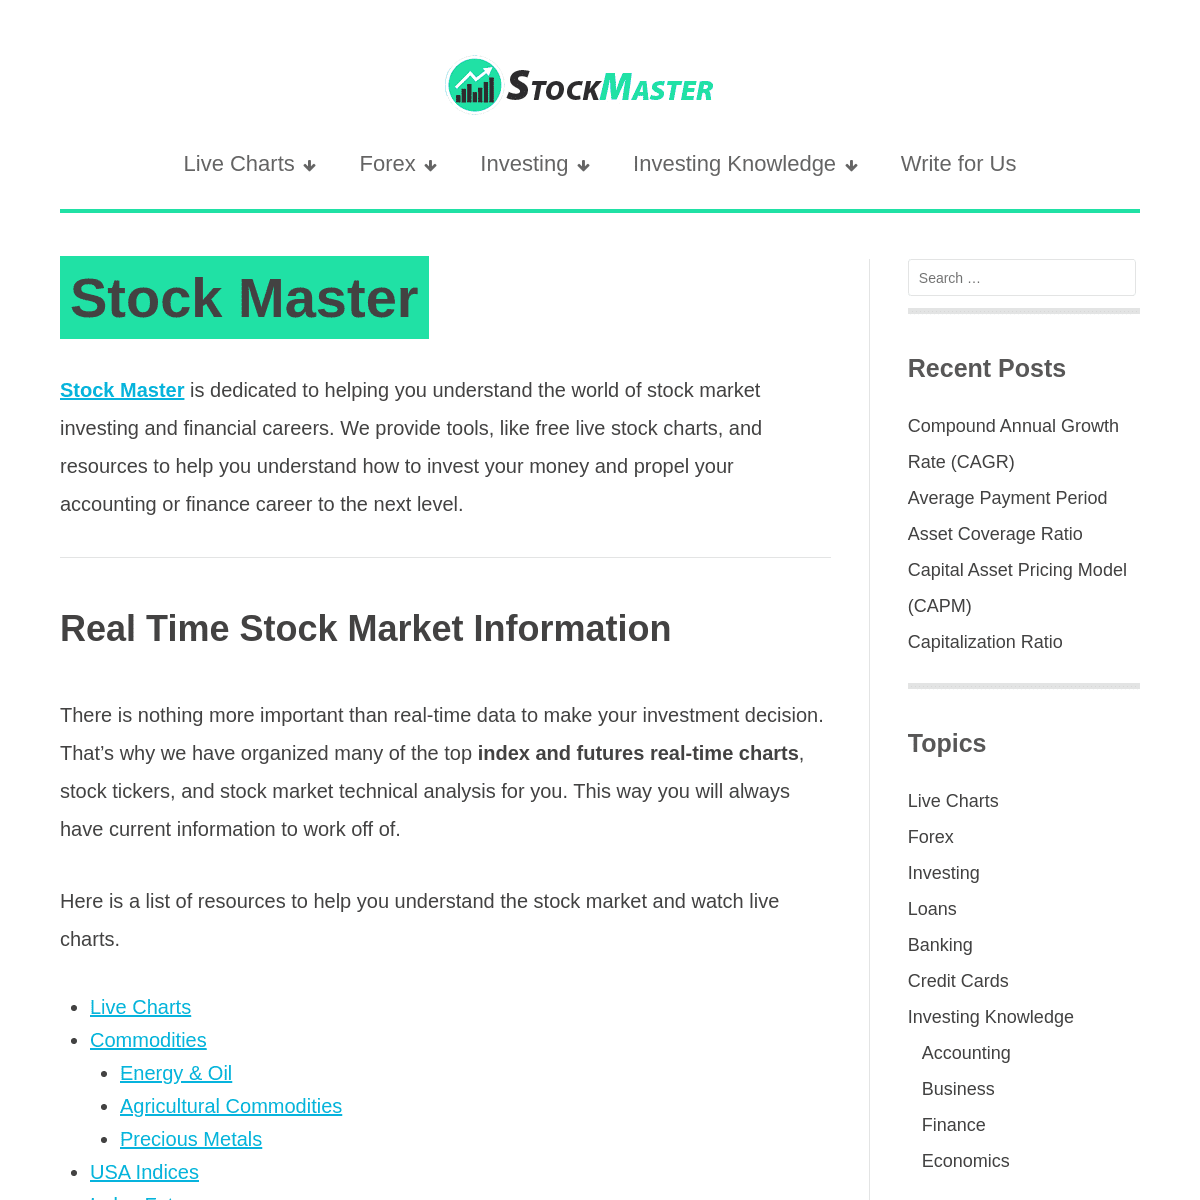 A complete backup of https://stockmaster.com